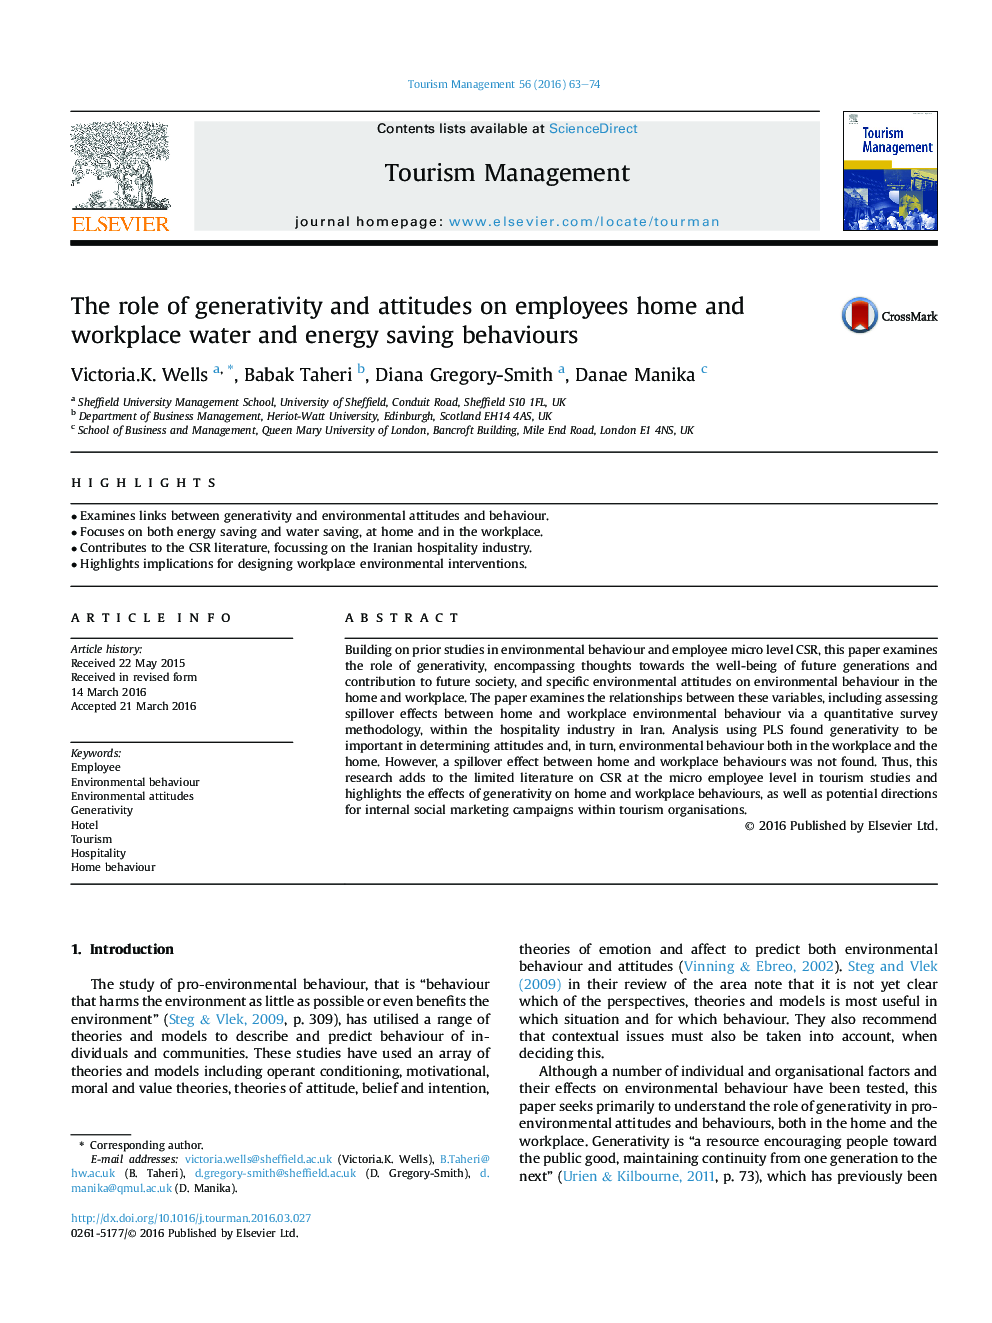 The role of generativity and attitudes on employees home and workplace water and energy saving behaviours